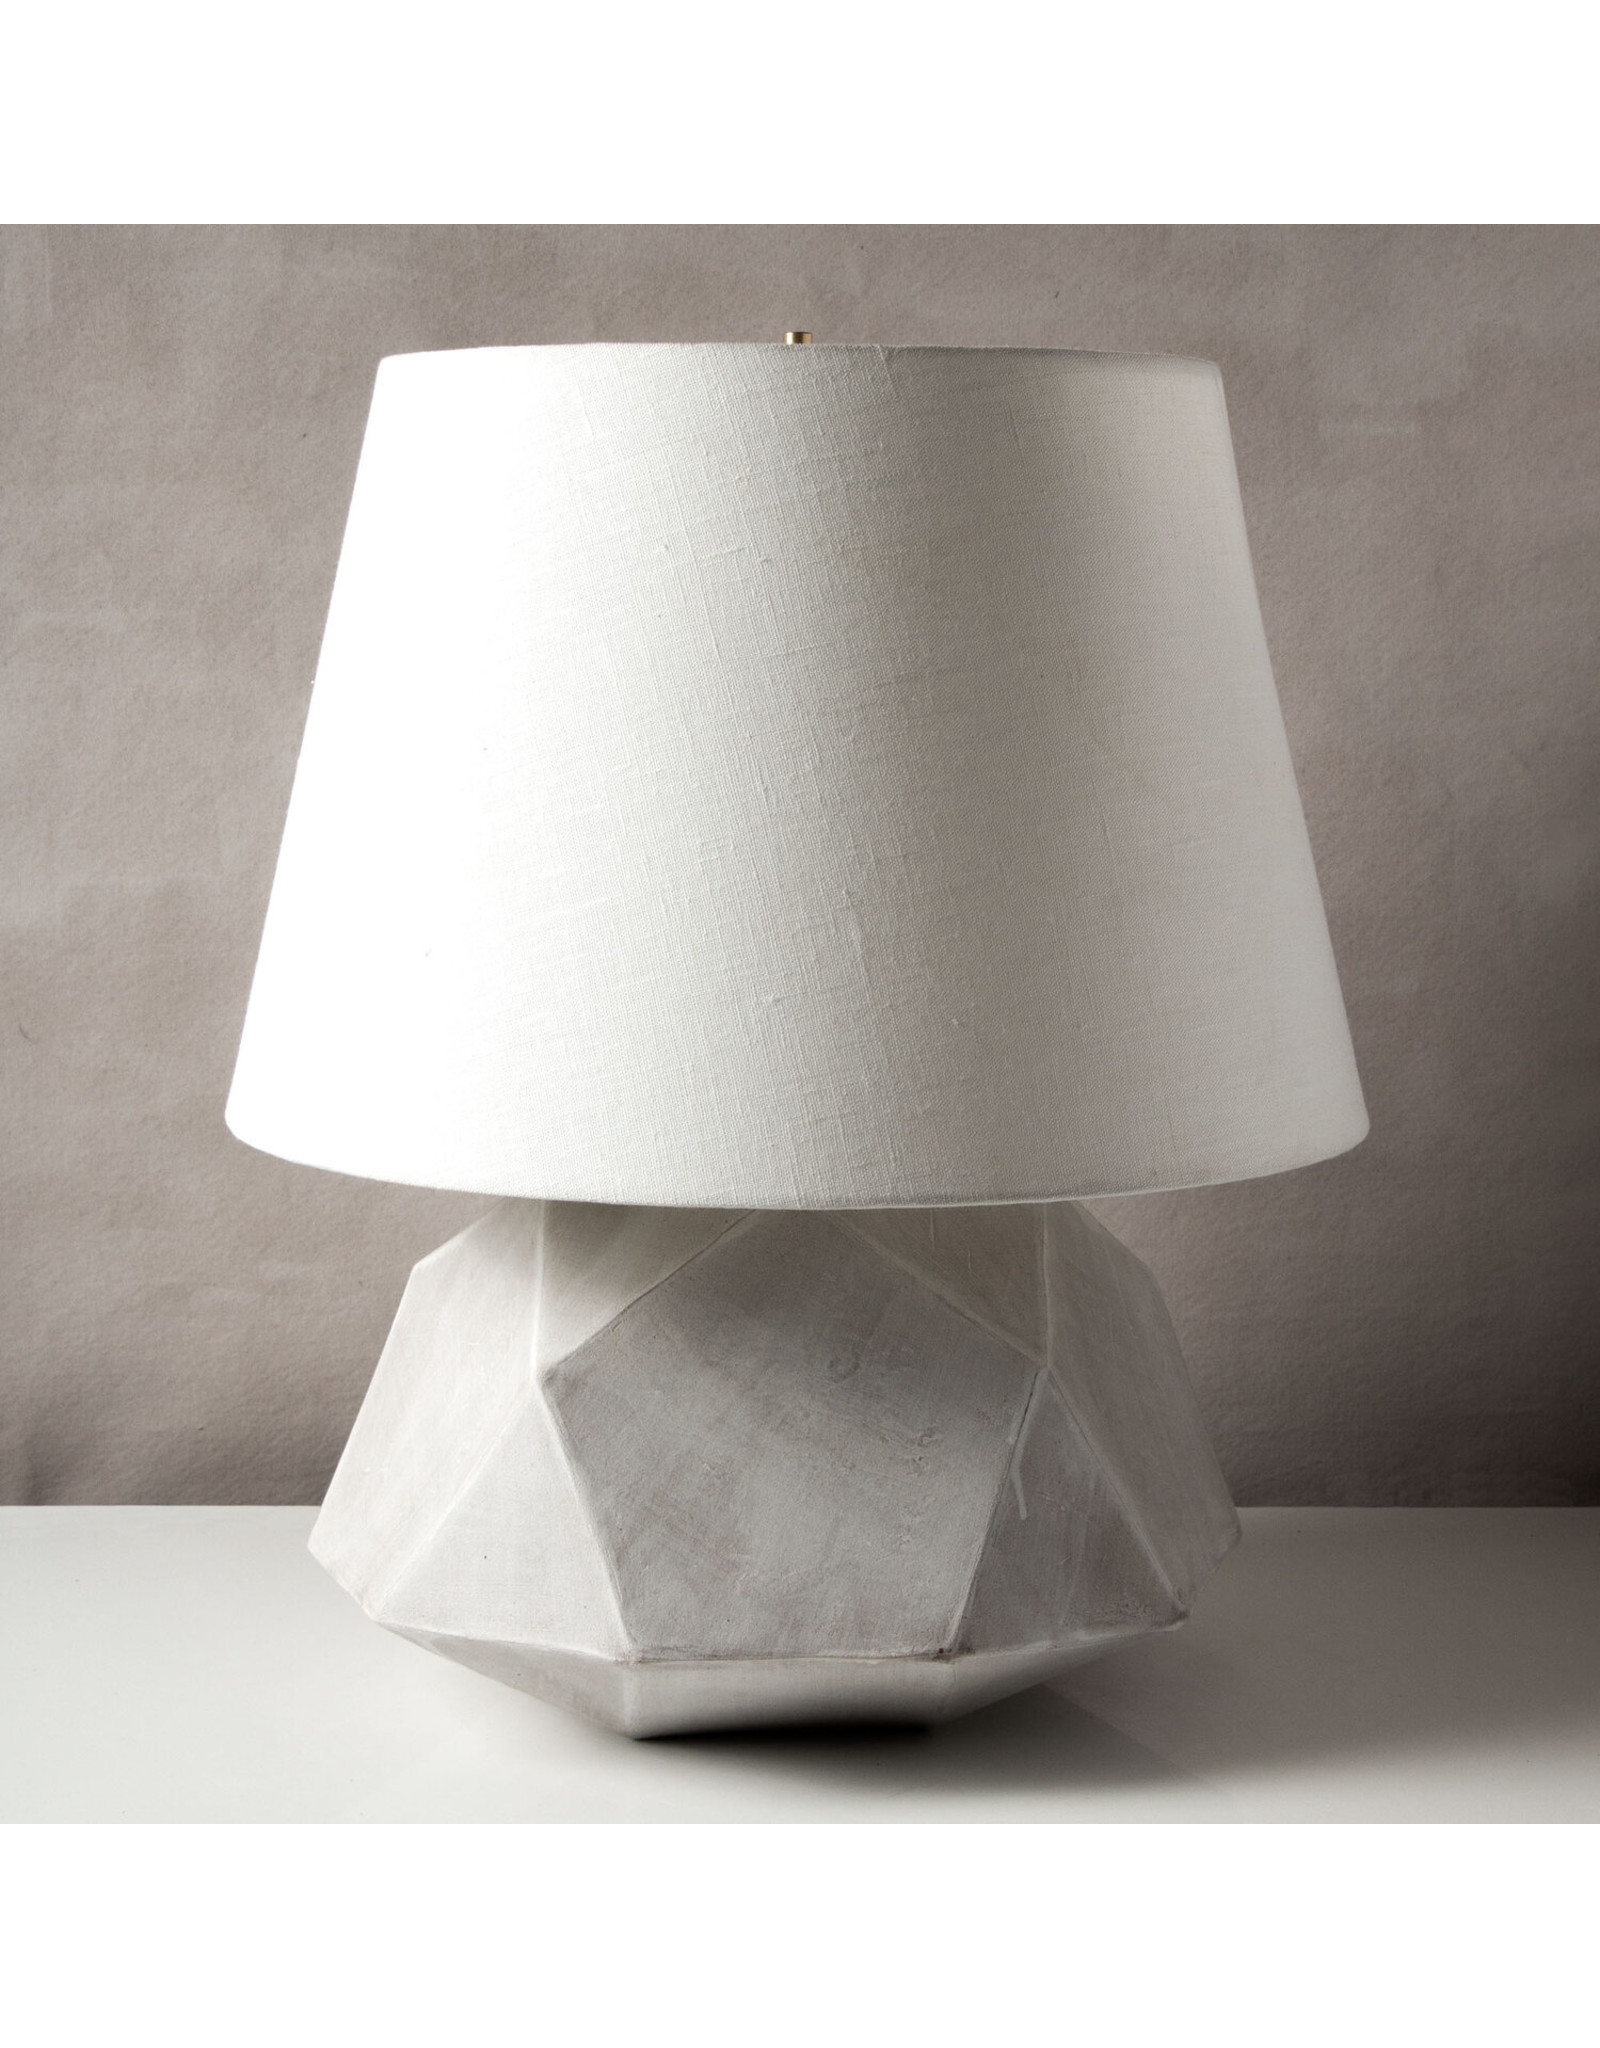 Handcrafted Organic Ceramic Table Lamp